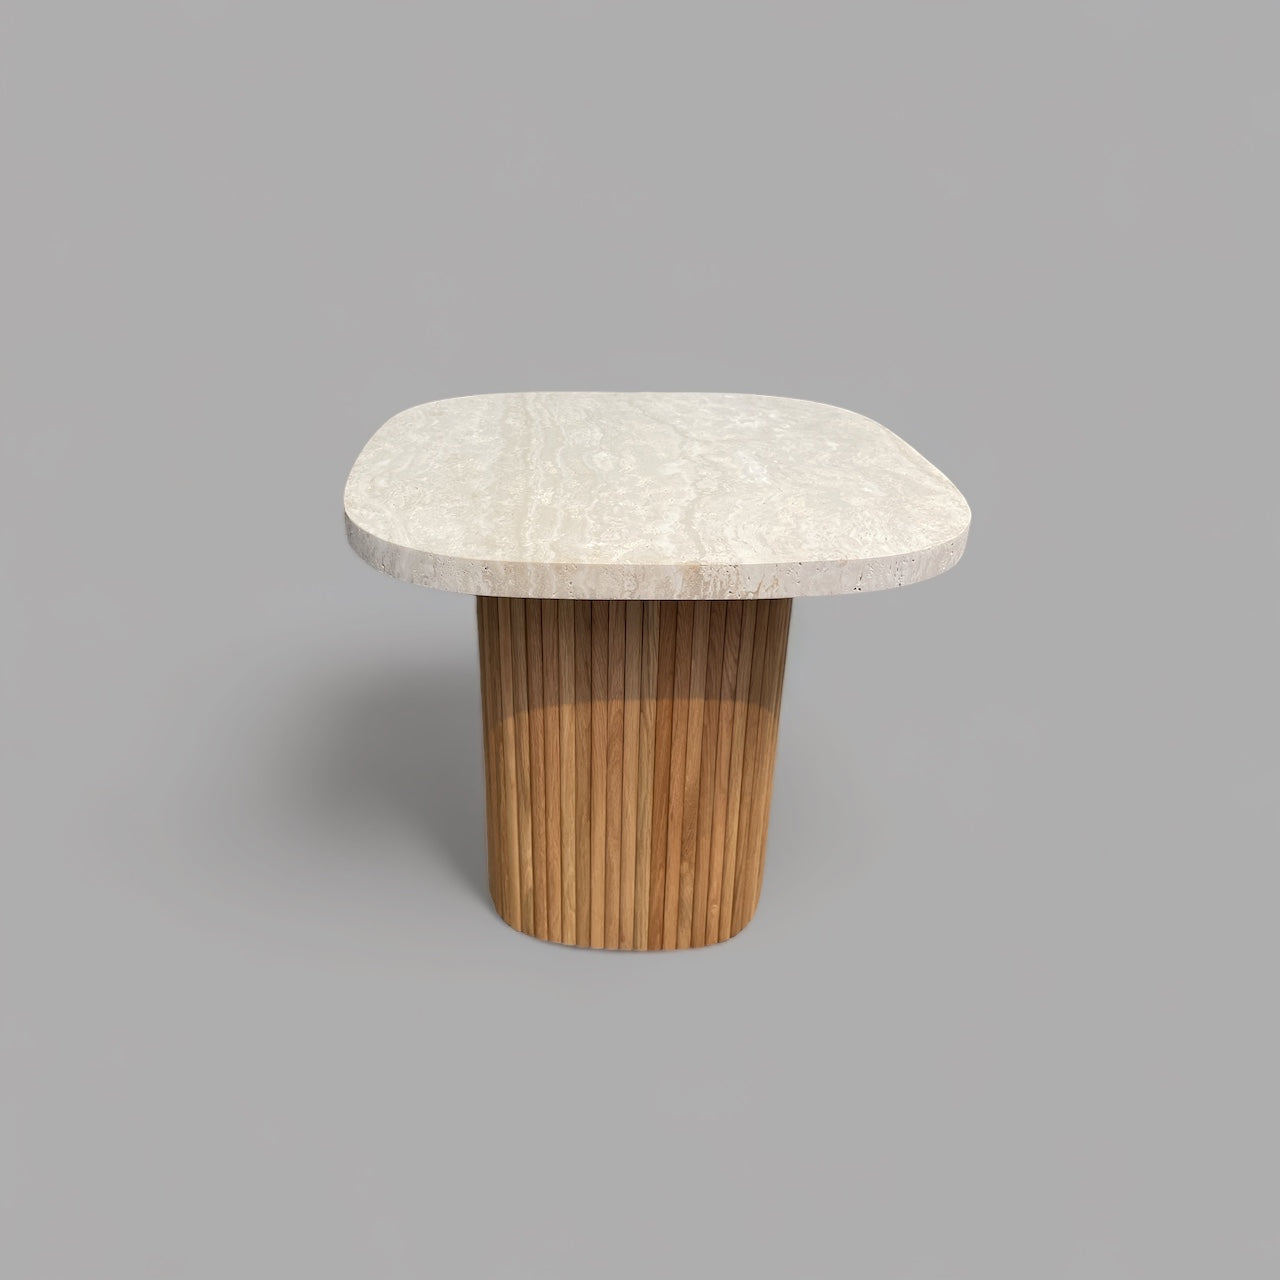 Gion side table - Clearance Item